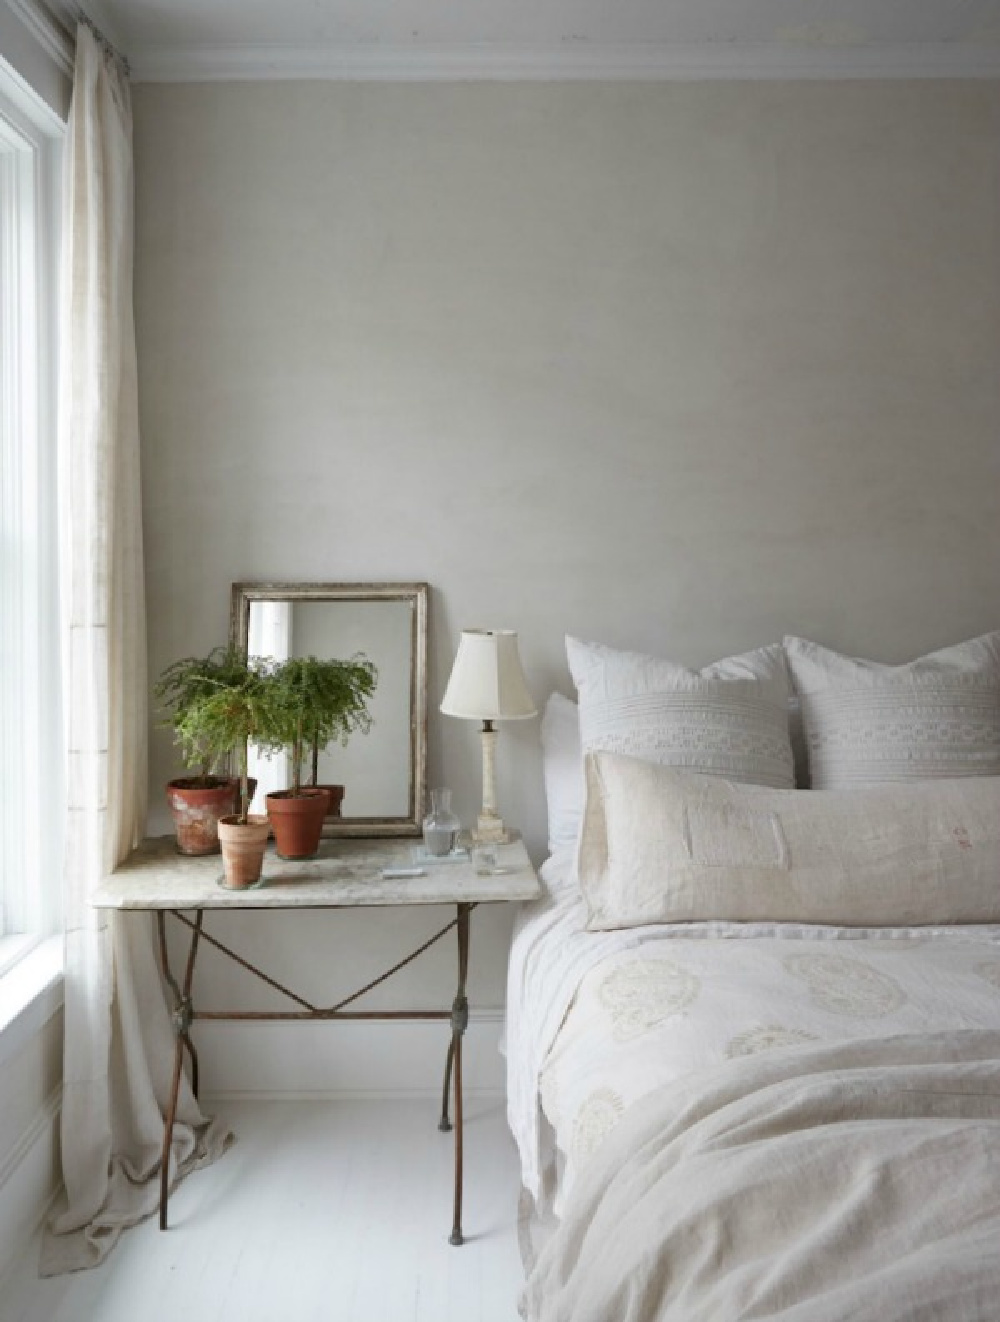 Serene bedroom with European rustic elegance looks as though it might be in the South of France, not New York...see more lovely examples of European farmhouse decor you can bring to your own spaces at home. #Europeanfarmhouse #elegantdecor #countrystyle